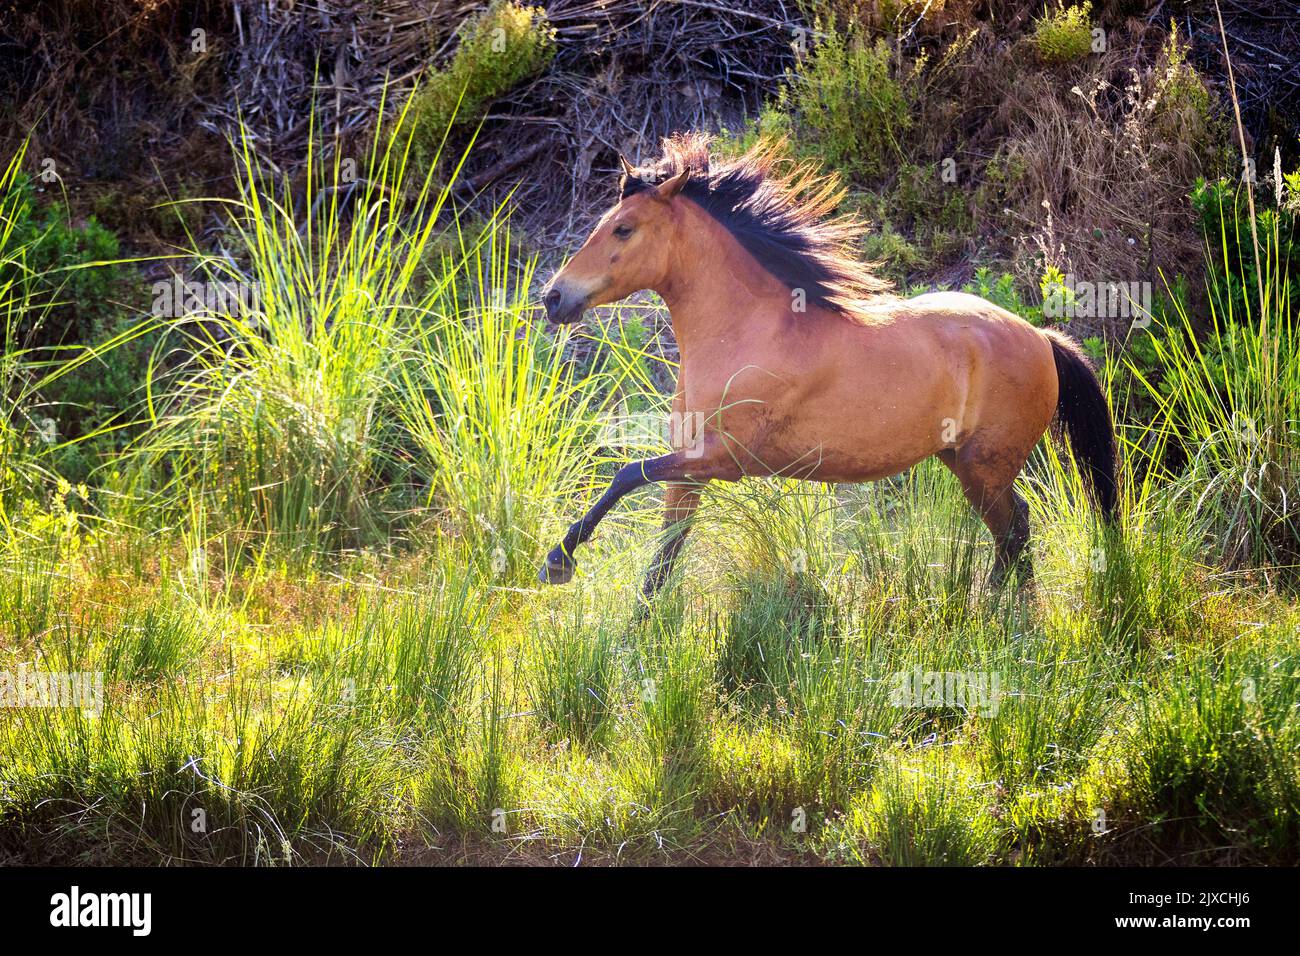 Rahvan Horse. Juvenile bay mare galloping in a swamp. Turkey Stock Photo